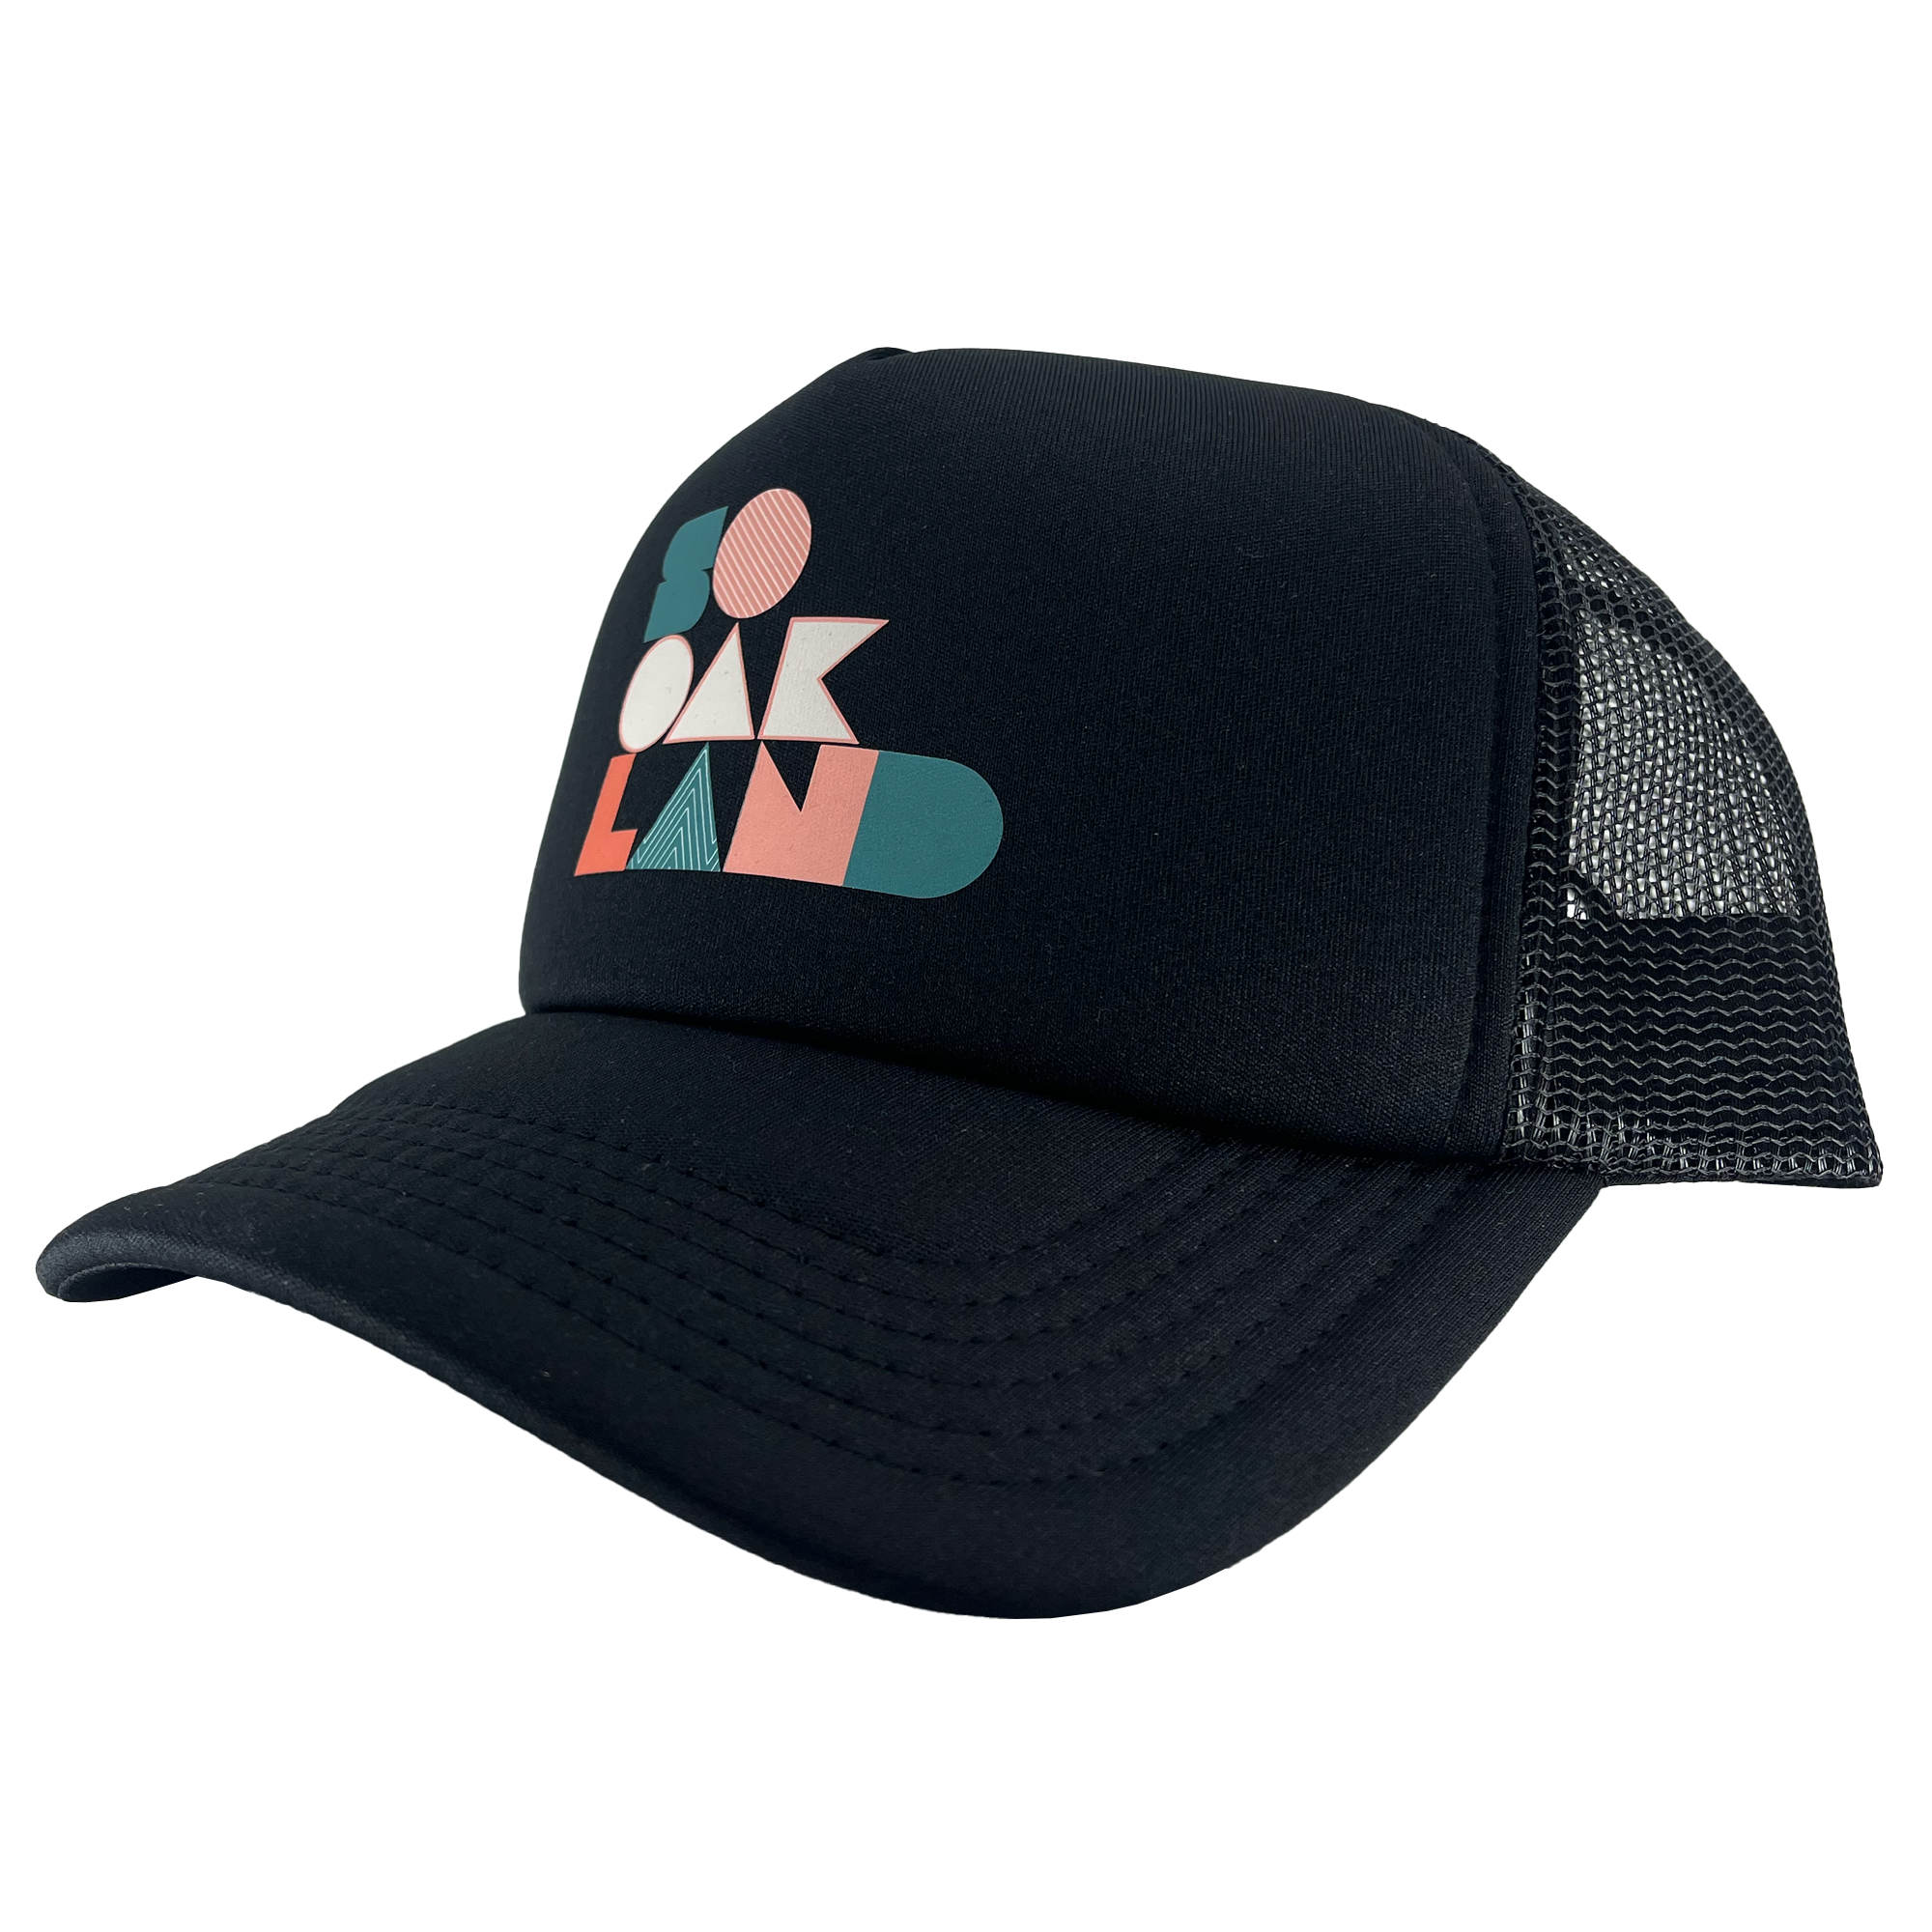 Side view of a black trucker cap with a mesh back and full-color SoOakland wordmark in the crown.